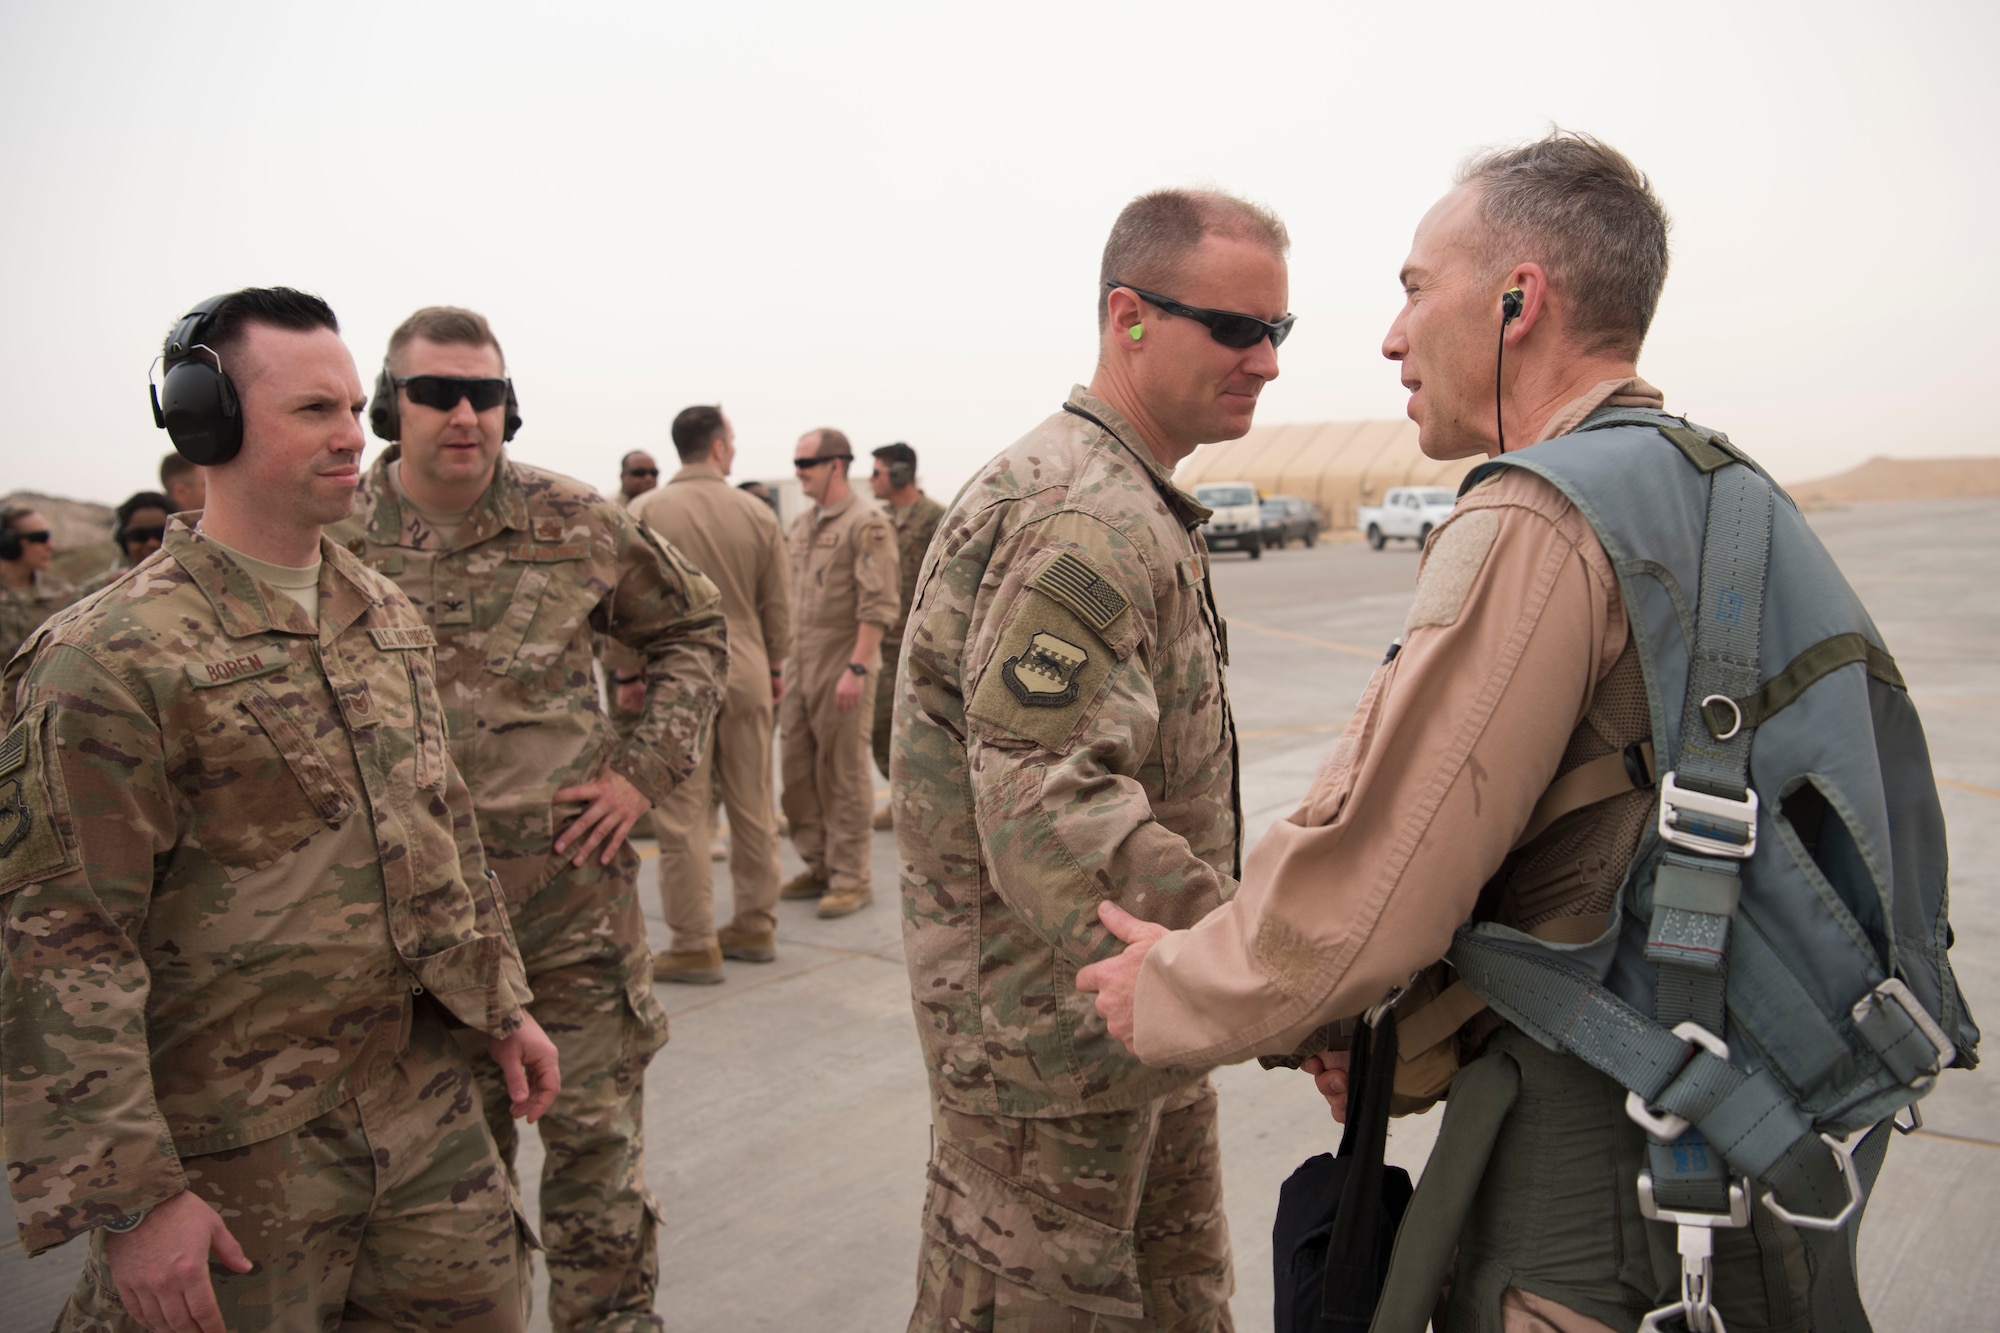 Airmen with the 332nd Air Expeditionary Wing congratulate Col. Shane Steinke, 332nd AEW vice commander, for completing his final flight May 7, 2018, at an undisclosed location in Southwest Asia.